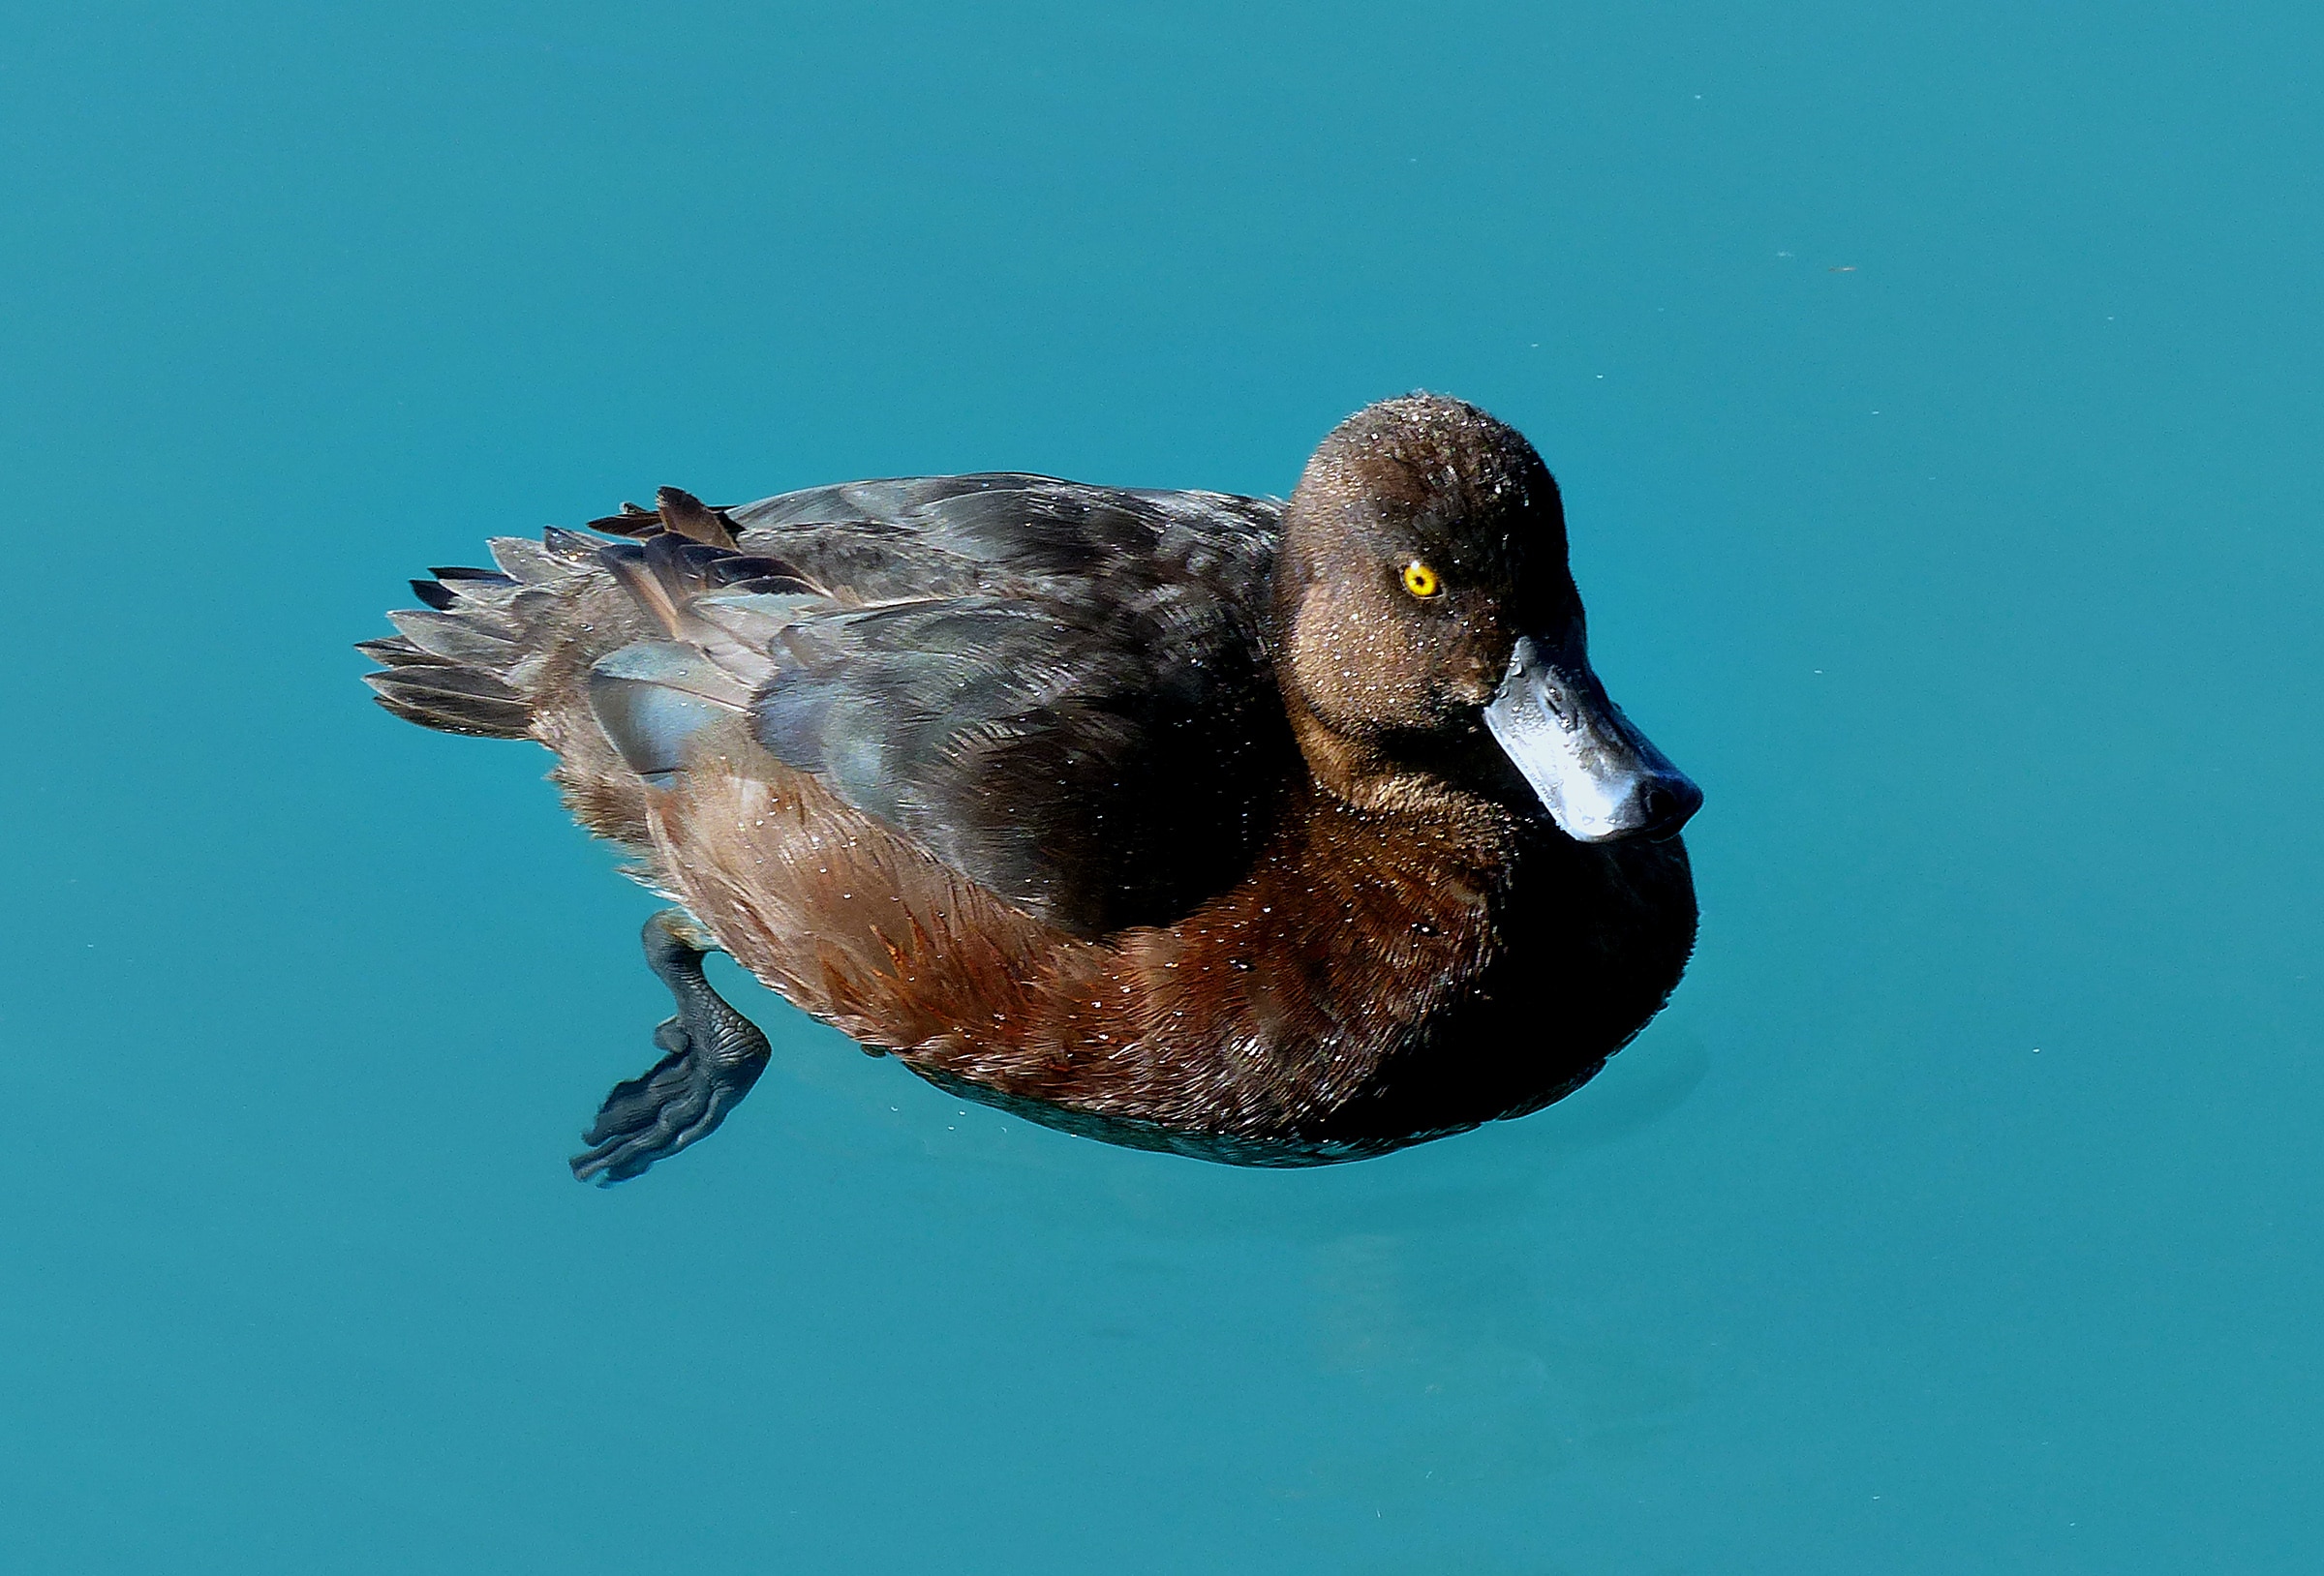 Scaup on blue water.